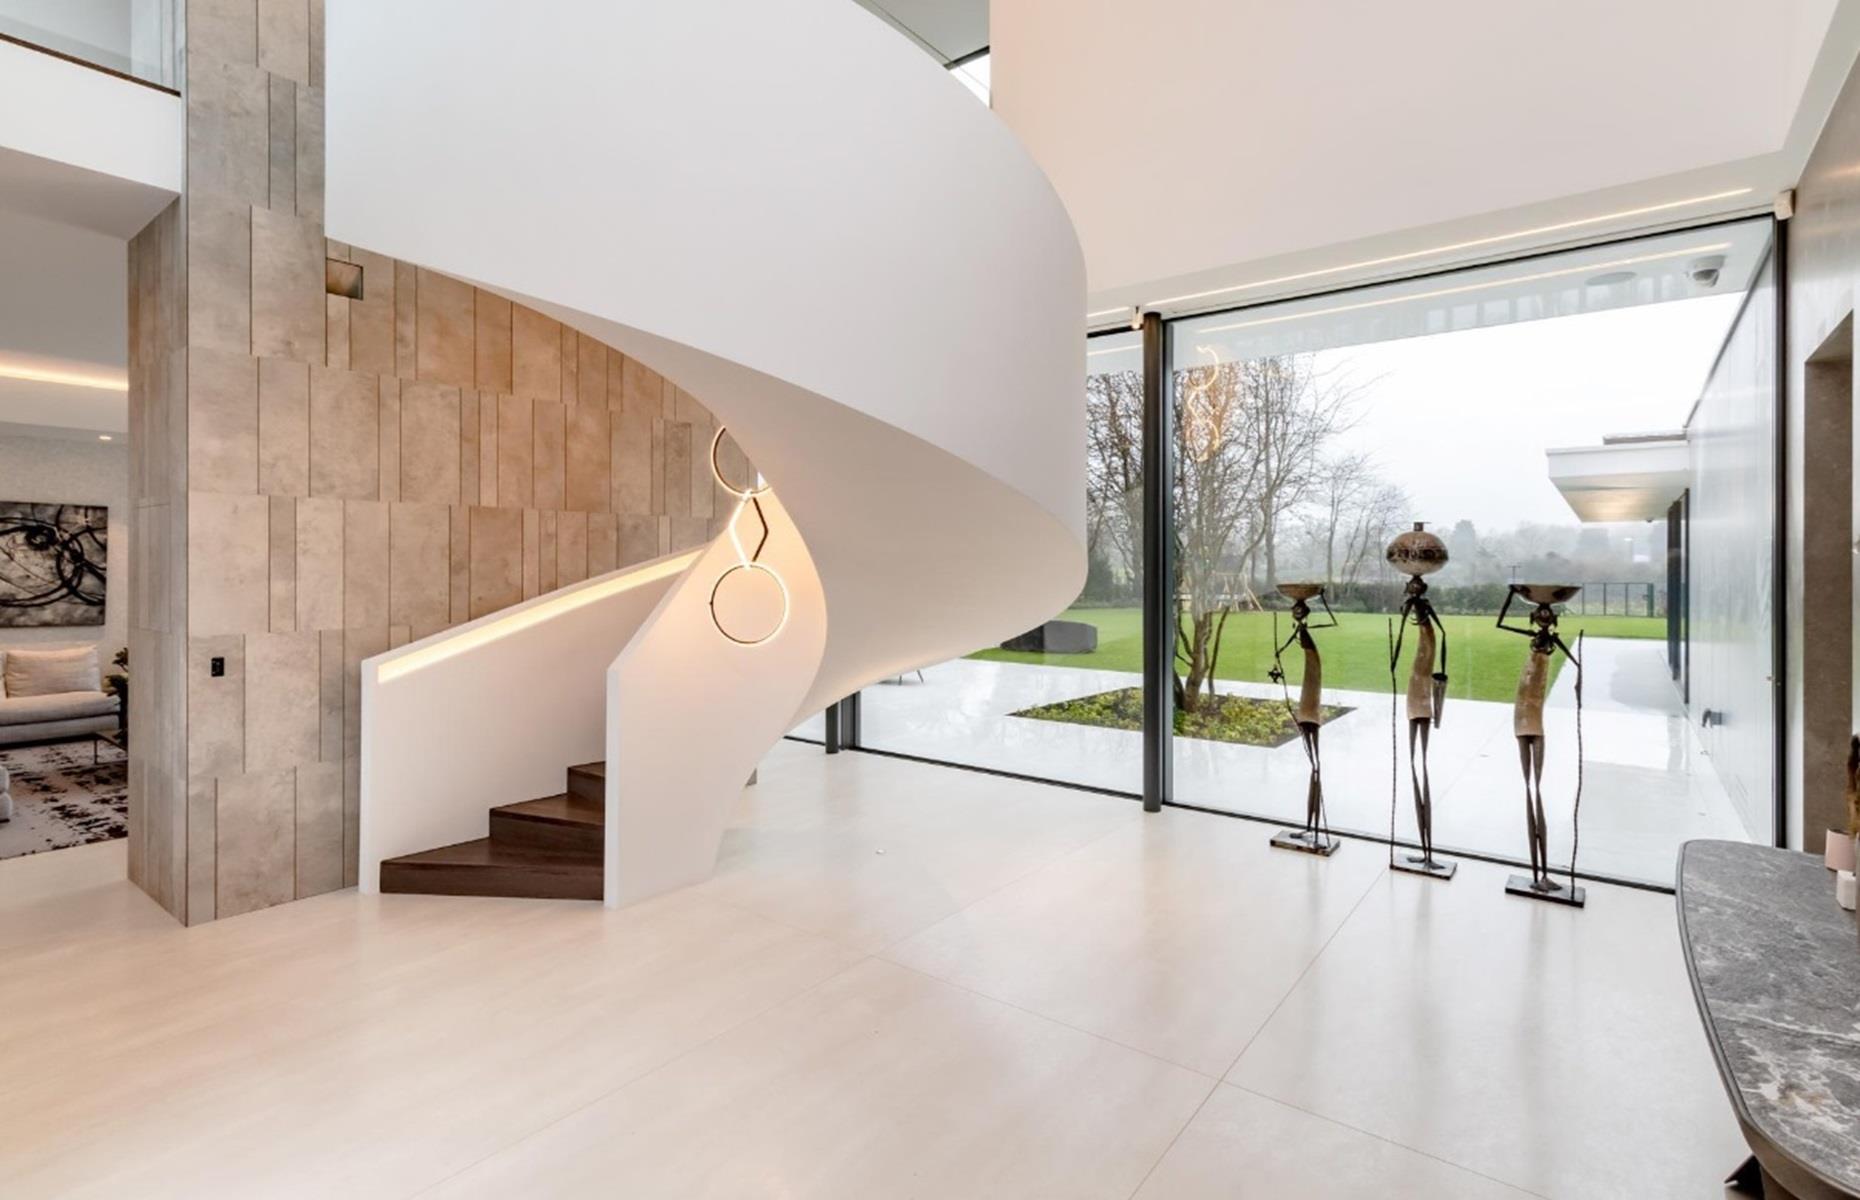 <p>The front door opens into a gorgeous entrance hall, complete with a bespoke spiral staircase and Flos chandeliers. The space flows through to a formal living room, Siematic kitchen, study, luxurious cinema room, home gym and indoor swimming pool – complete with a jacuzzi.</p>